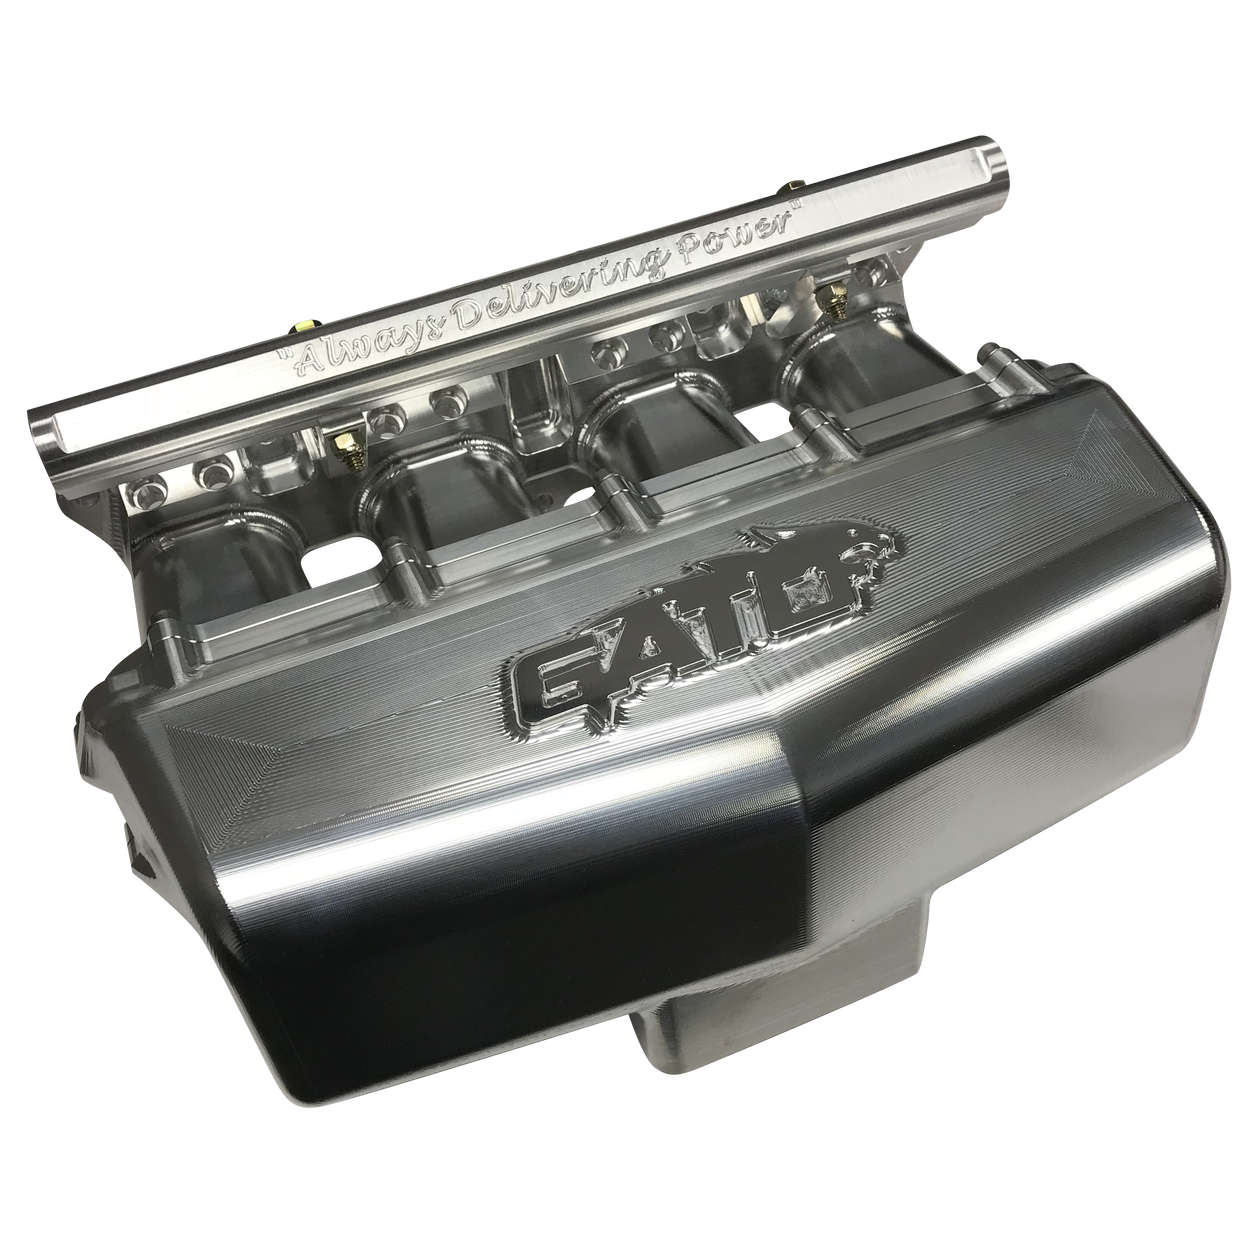 K-Series Intake Manifold from Gato Performance (4 Or 8 Injector – DRAG CARTEL IND.